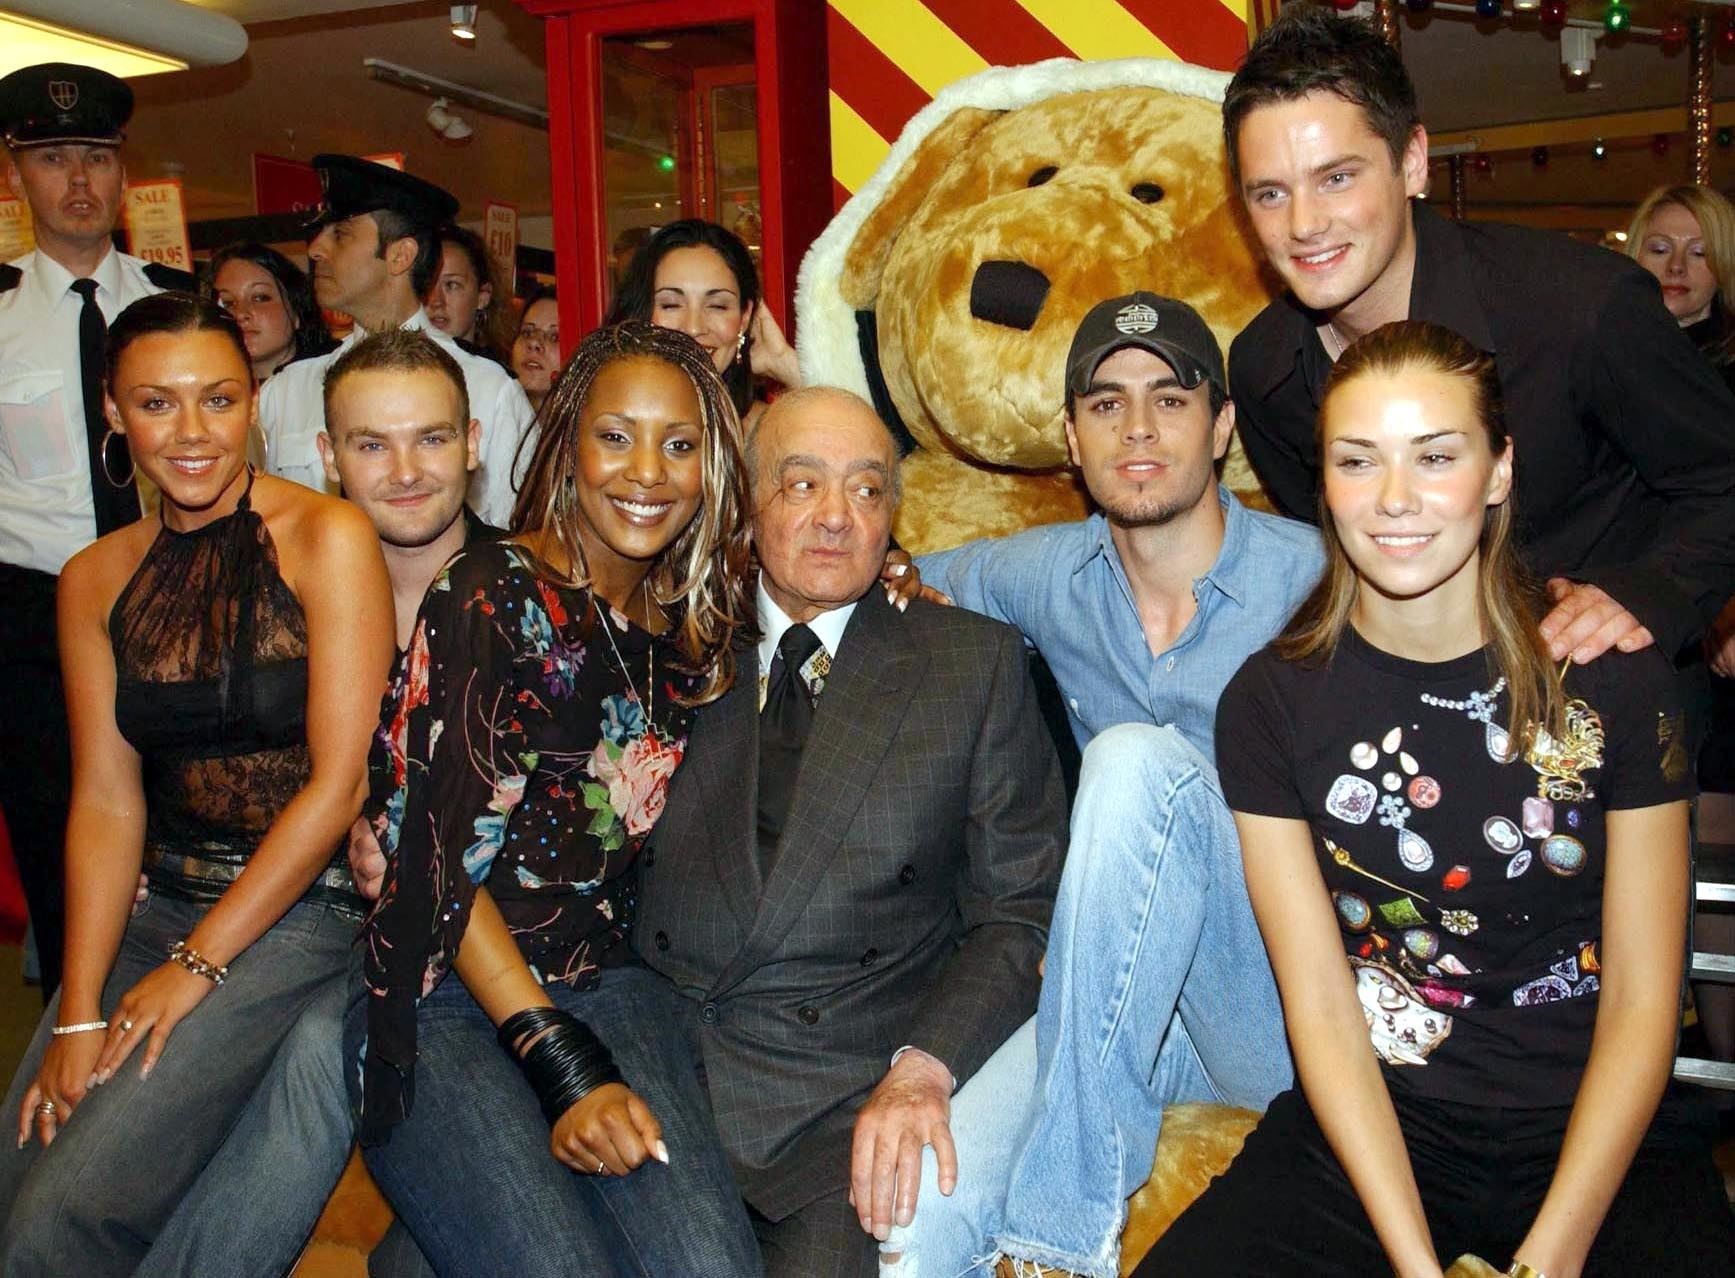 Harrods chairman Mohamed Al Fayed with pop band Liberty X and singer Enrique Iglesias in Knightsbridge (Yui Mok/PA)